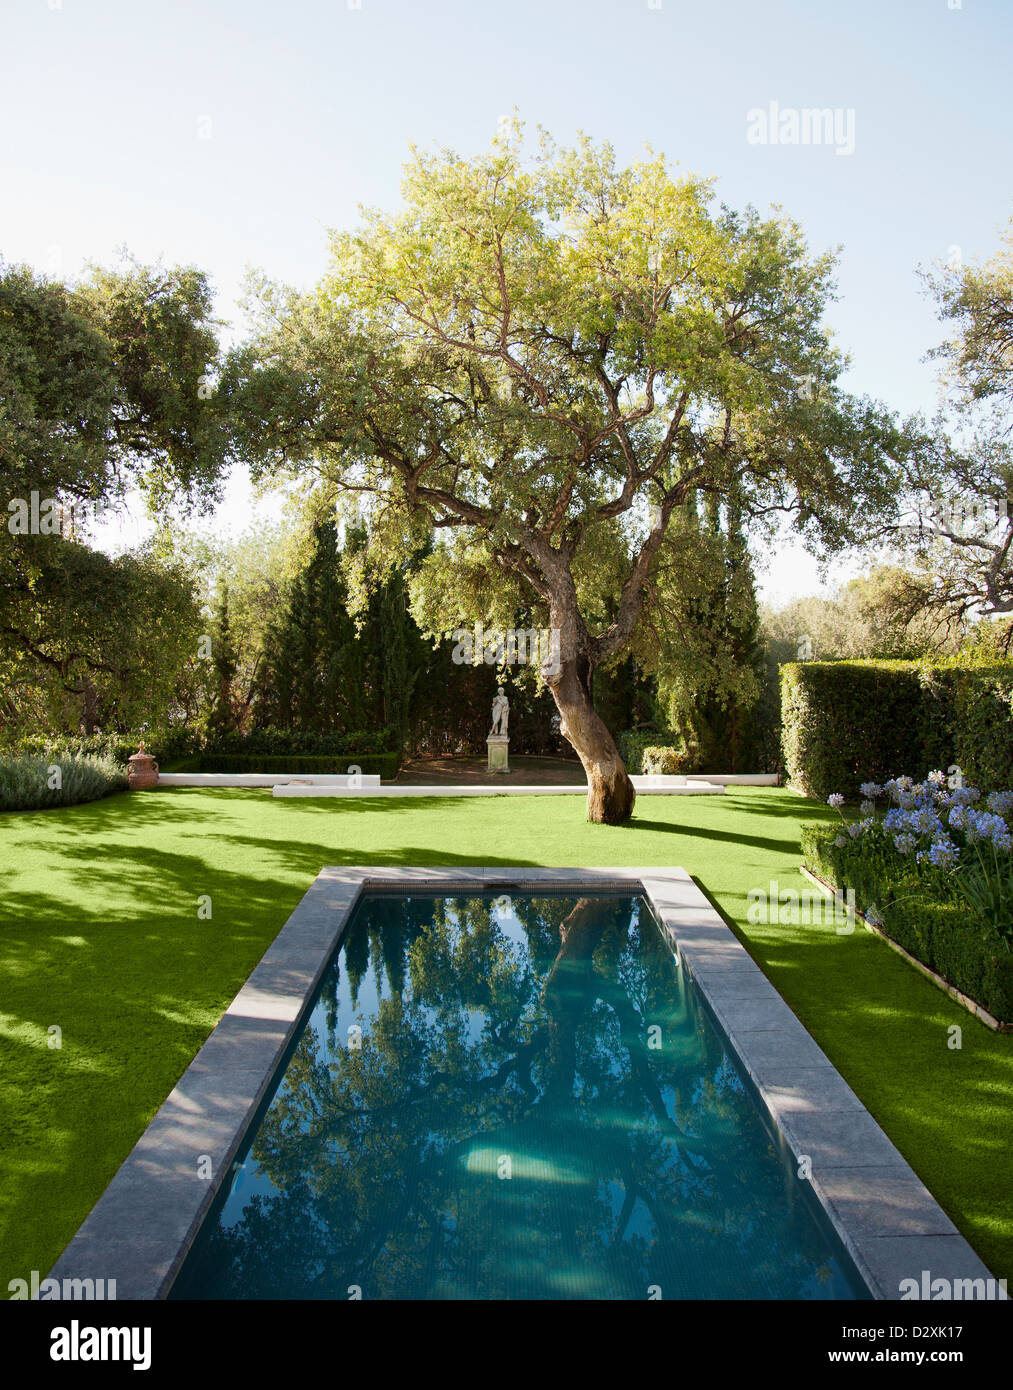 Lap pool in tranquil garden Stock Photo